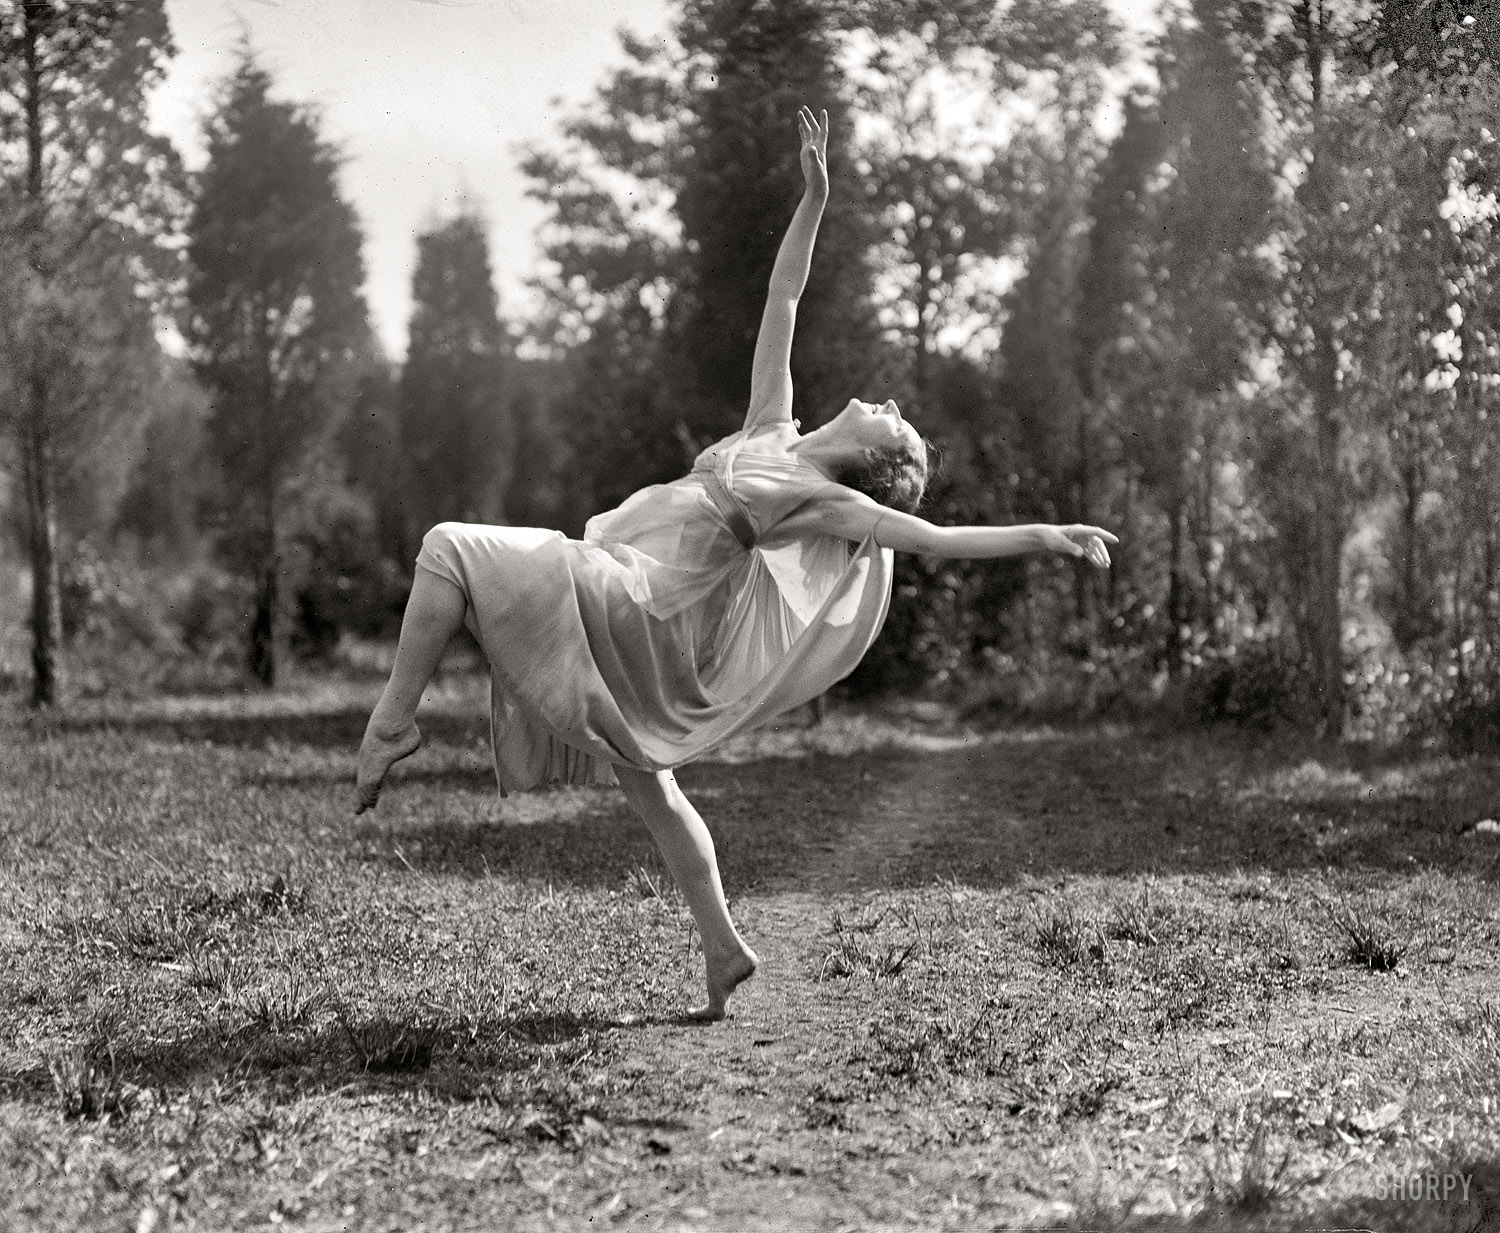 "Madame Lubouska, National American Ballet, 1924." The Russian dancer Desiree Lubowska, whose claim to fame seems to have been the popularization of "Egyptian" poses around 1915. National Photo glass negative. View full size.